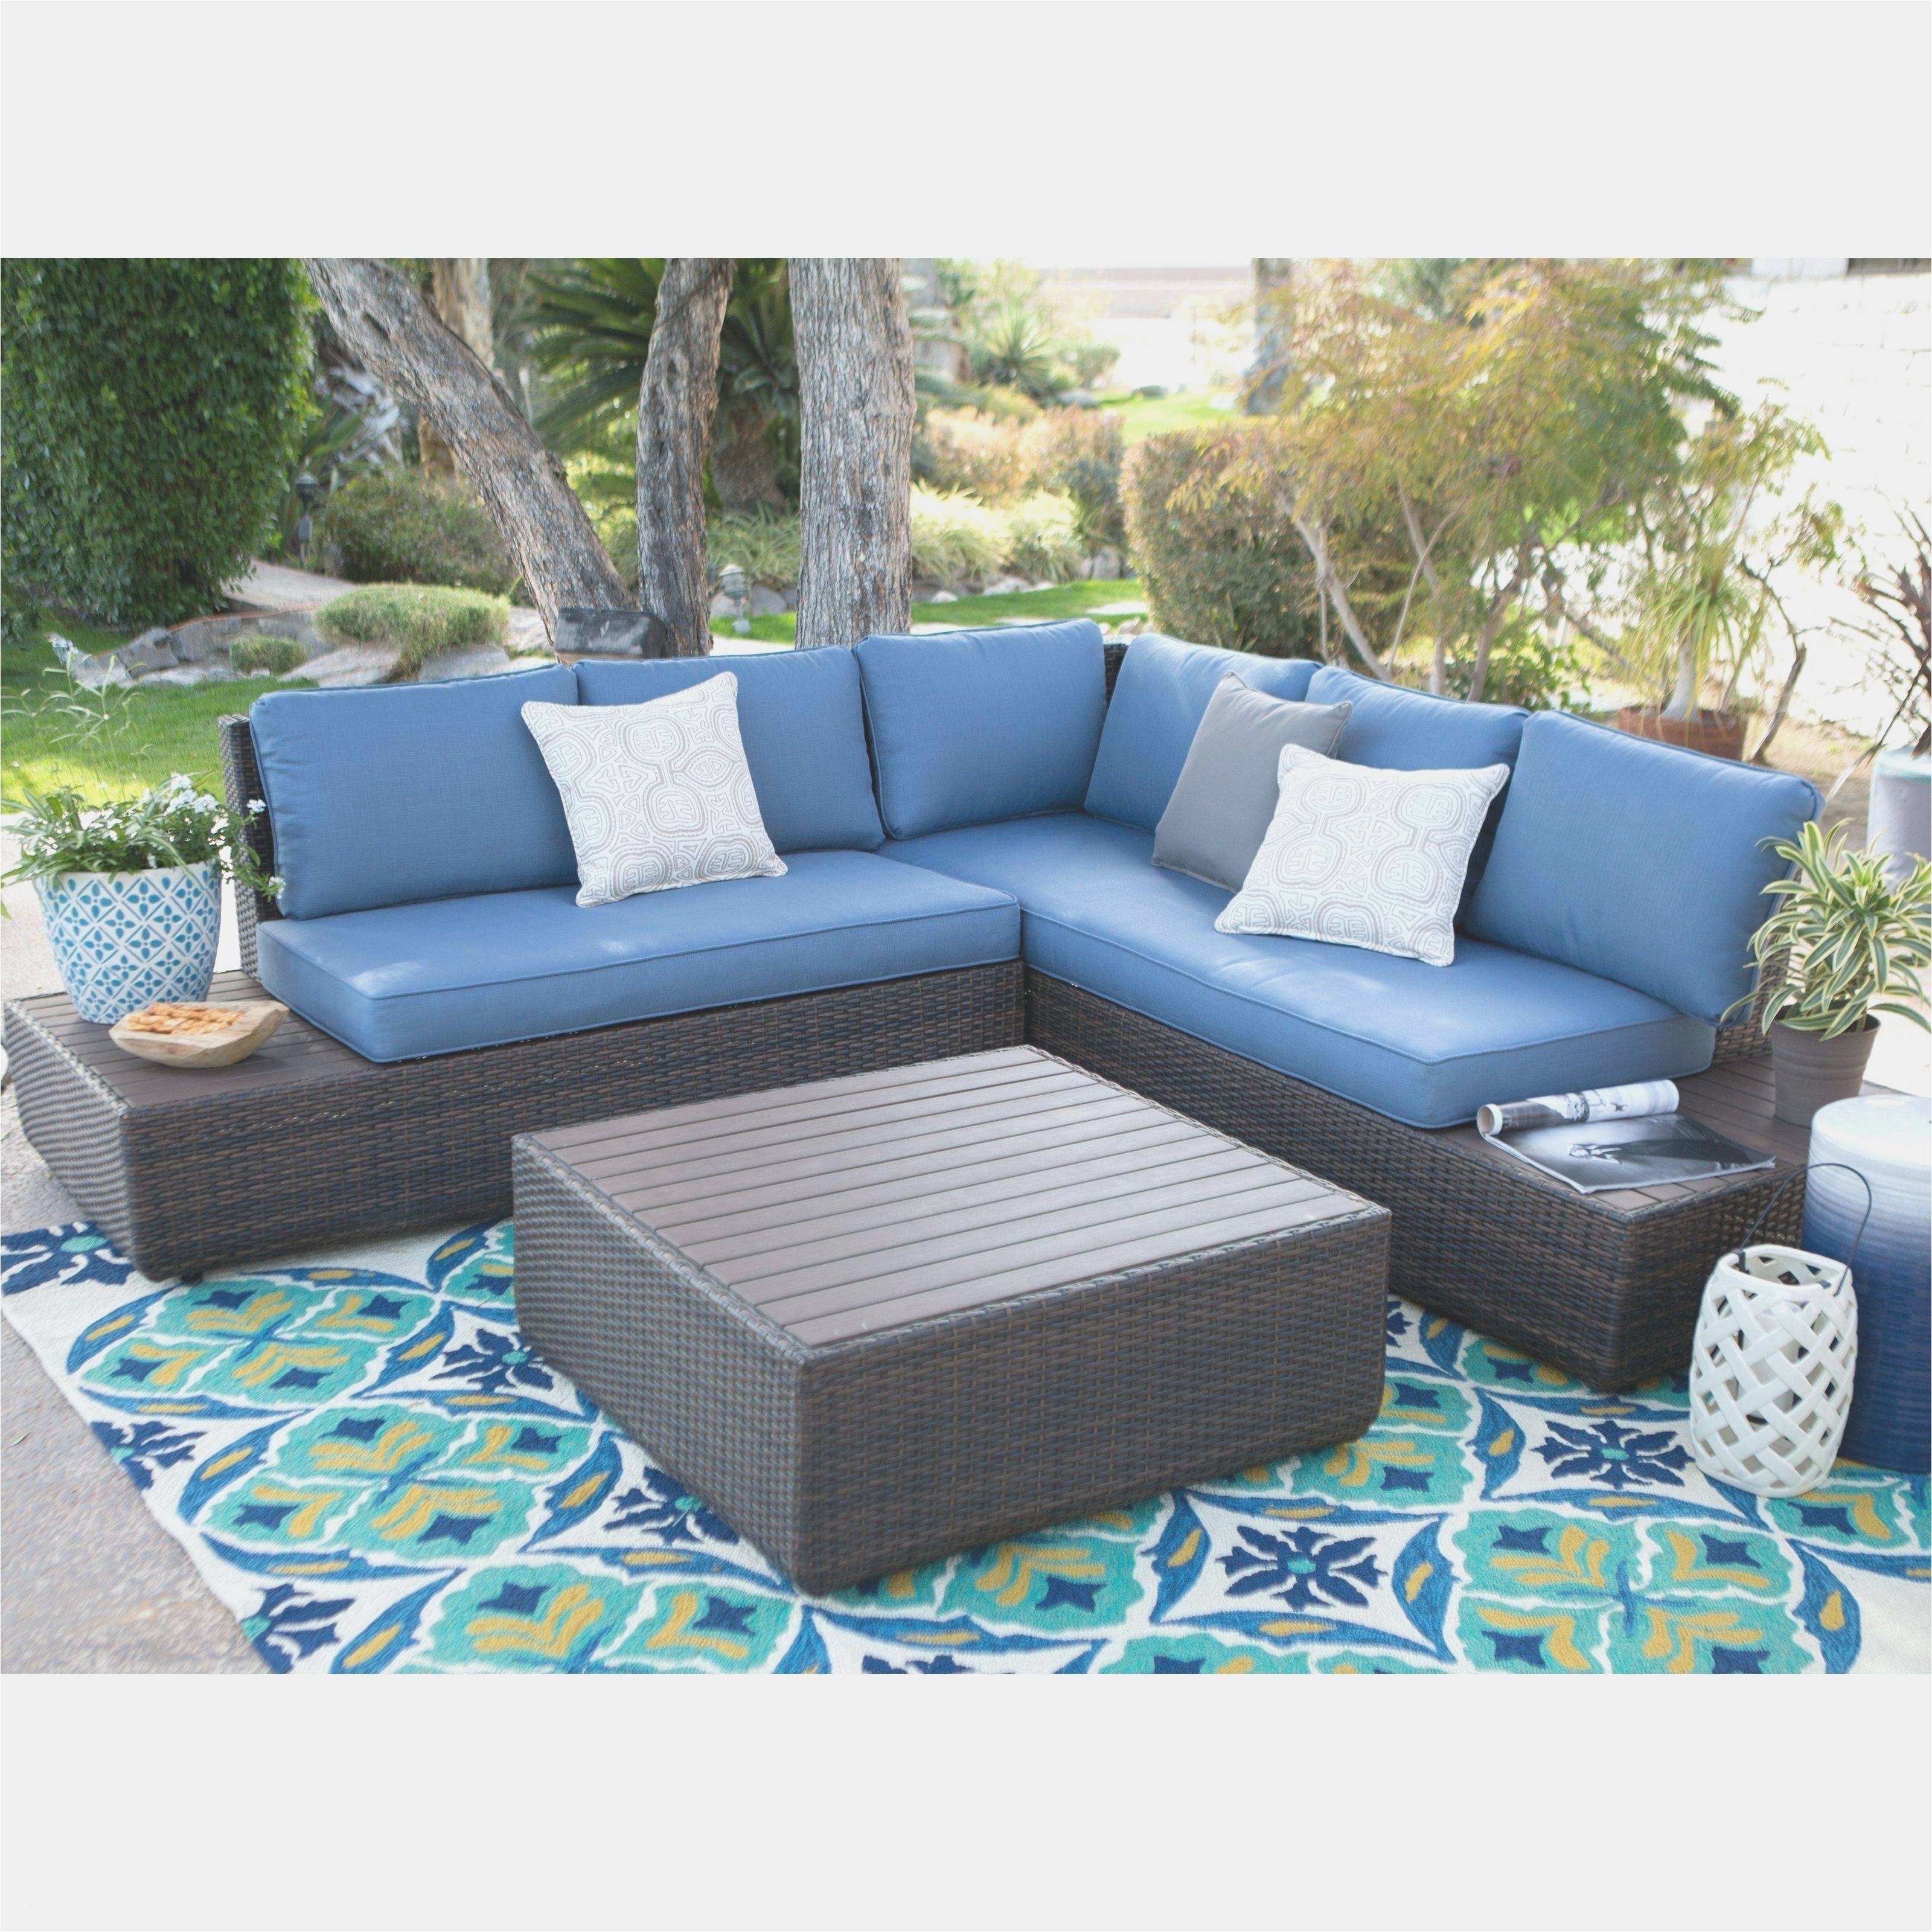 patio furniture lexington ky beautiful tommy bahama outdoor furniture luxury outdoor sofa 0d patio chairs